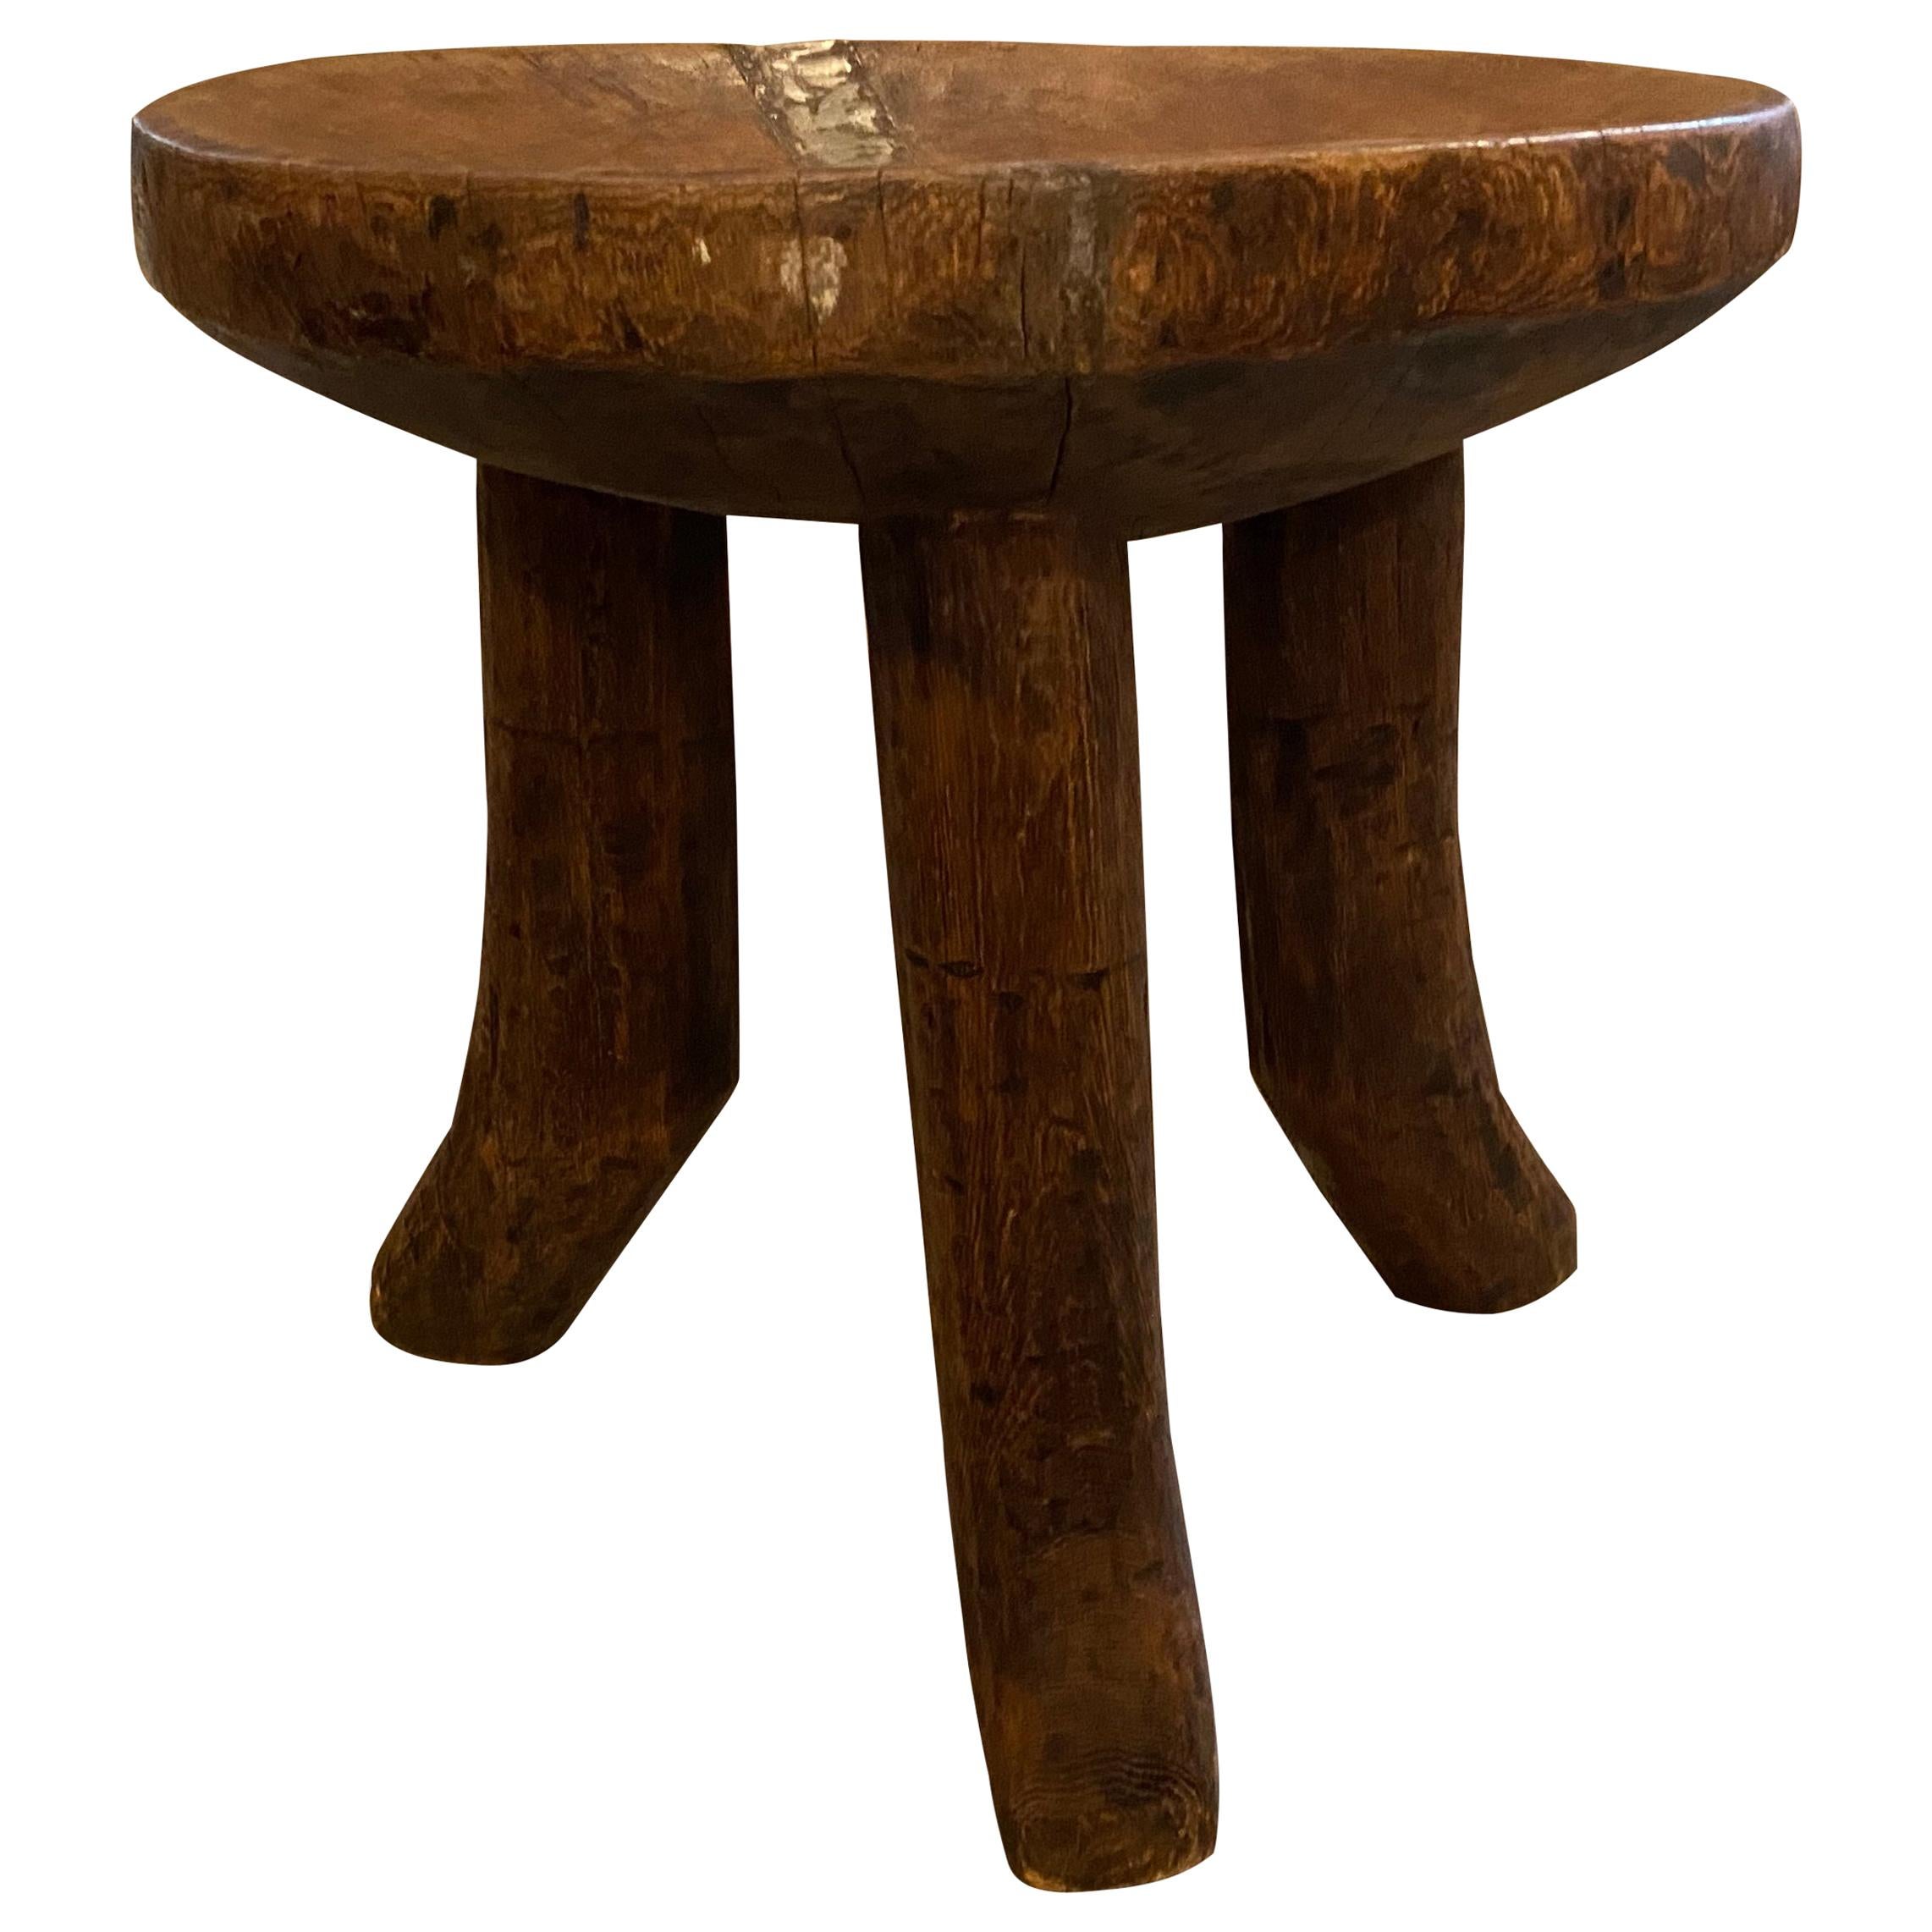 Andrianna Shamaris Antique African Mahogany Wood Sculptural Side Table or Bowl